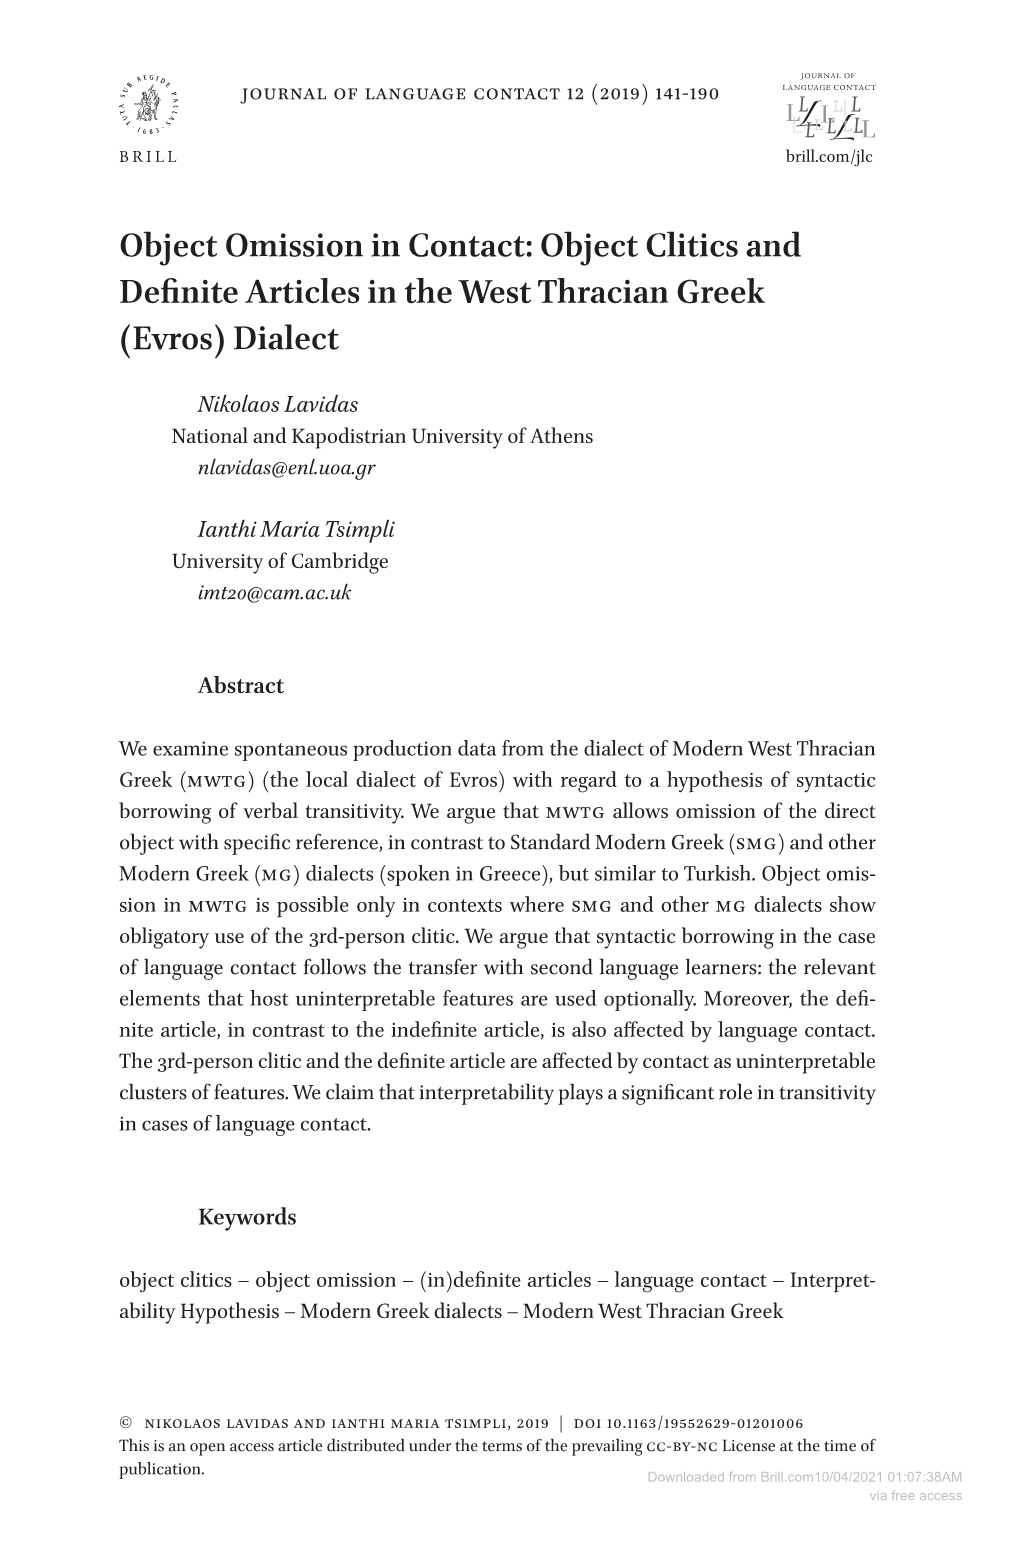 Object Clitics and Definite Articles in the West Thracian Greek (Evros) Dialect